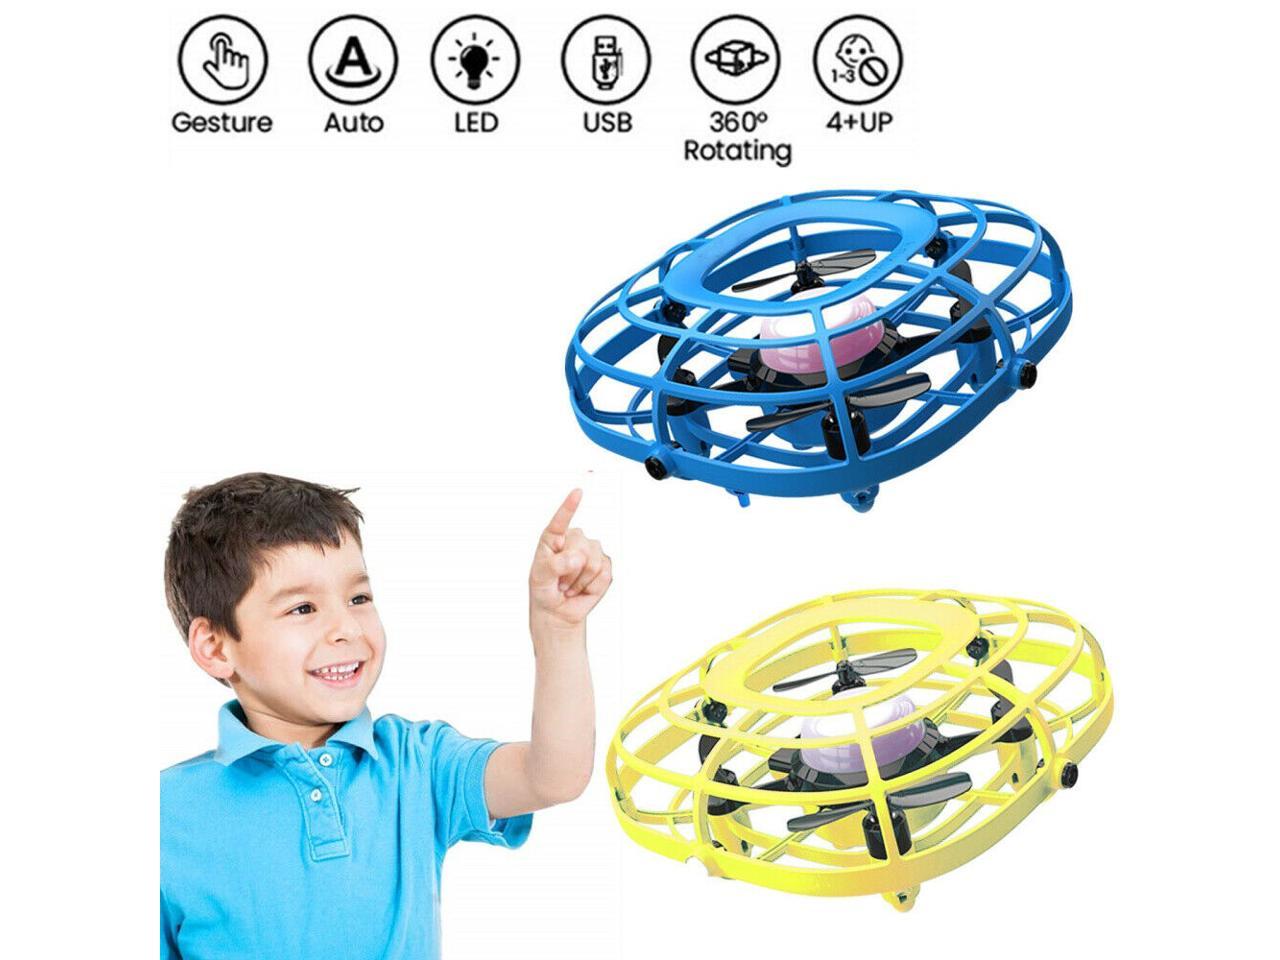 Udirc U58 For Kid RC Quadcopter Fan 2-in-1 Gesture Remote Interactive Drone UFO 